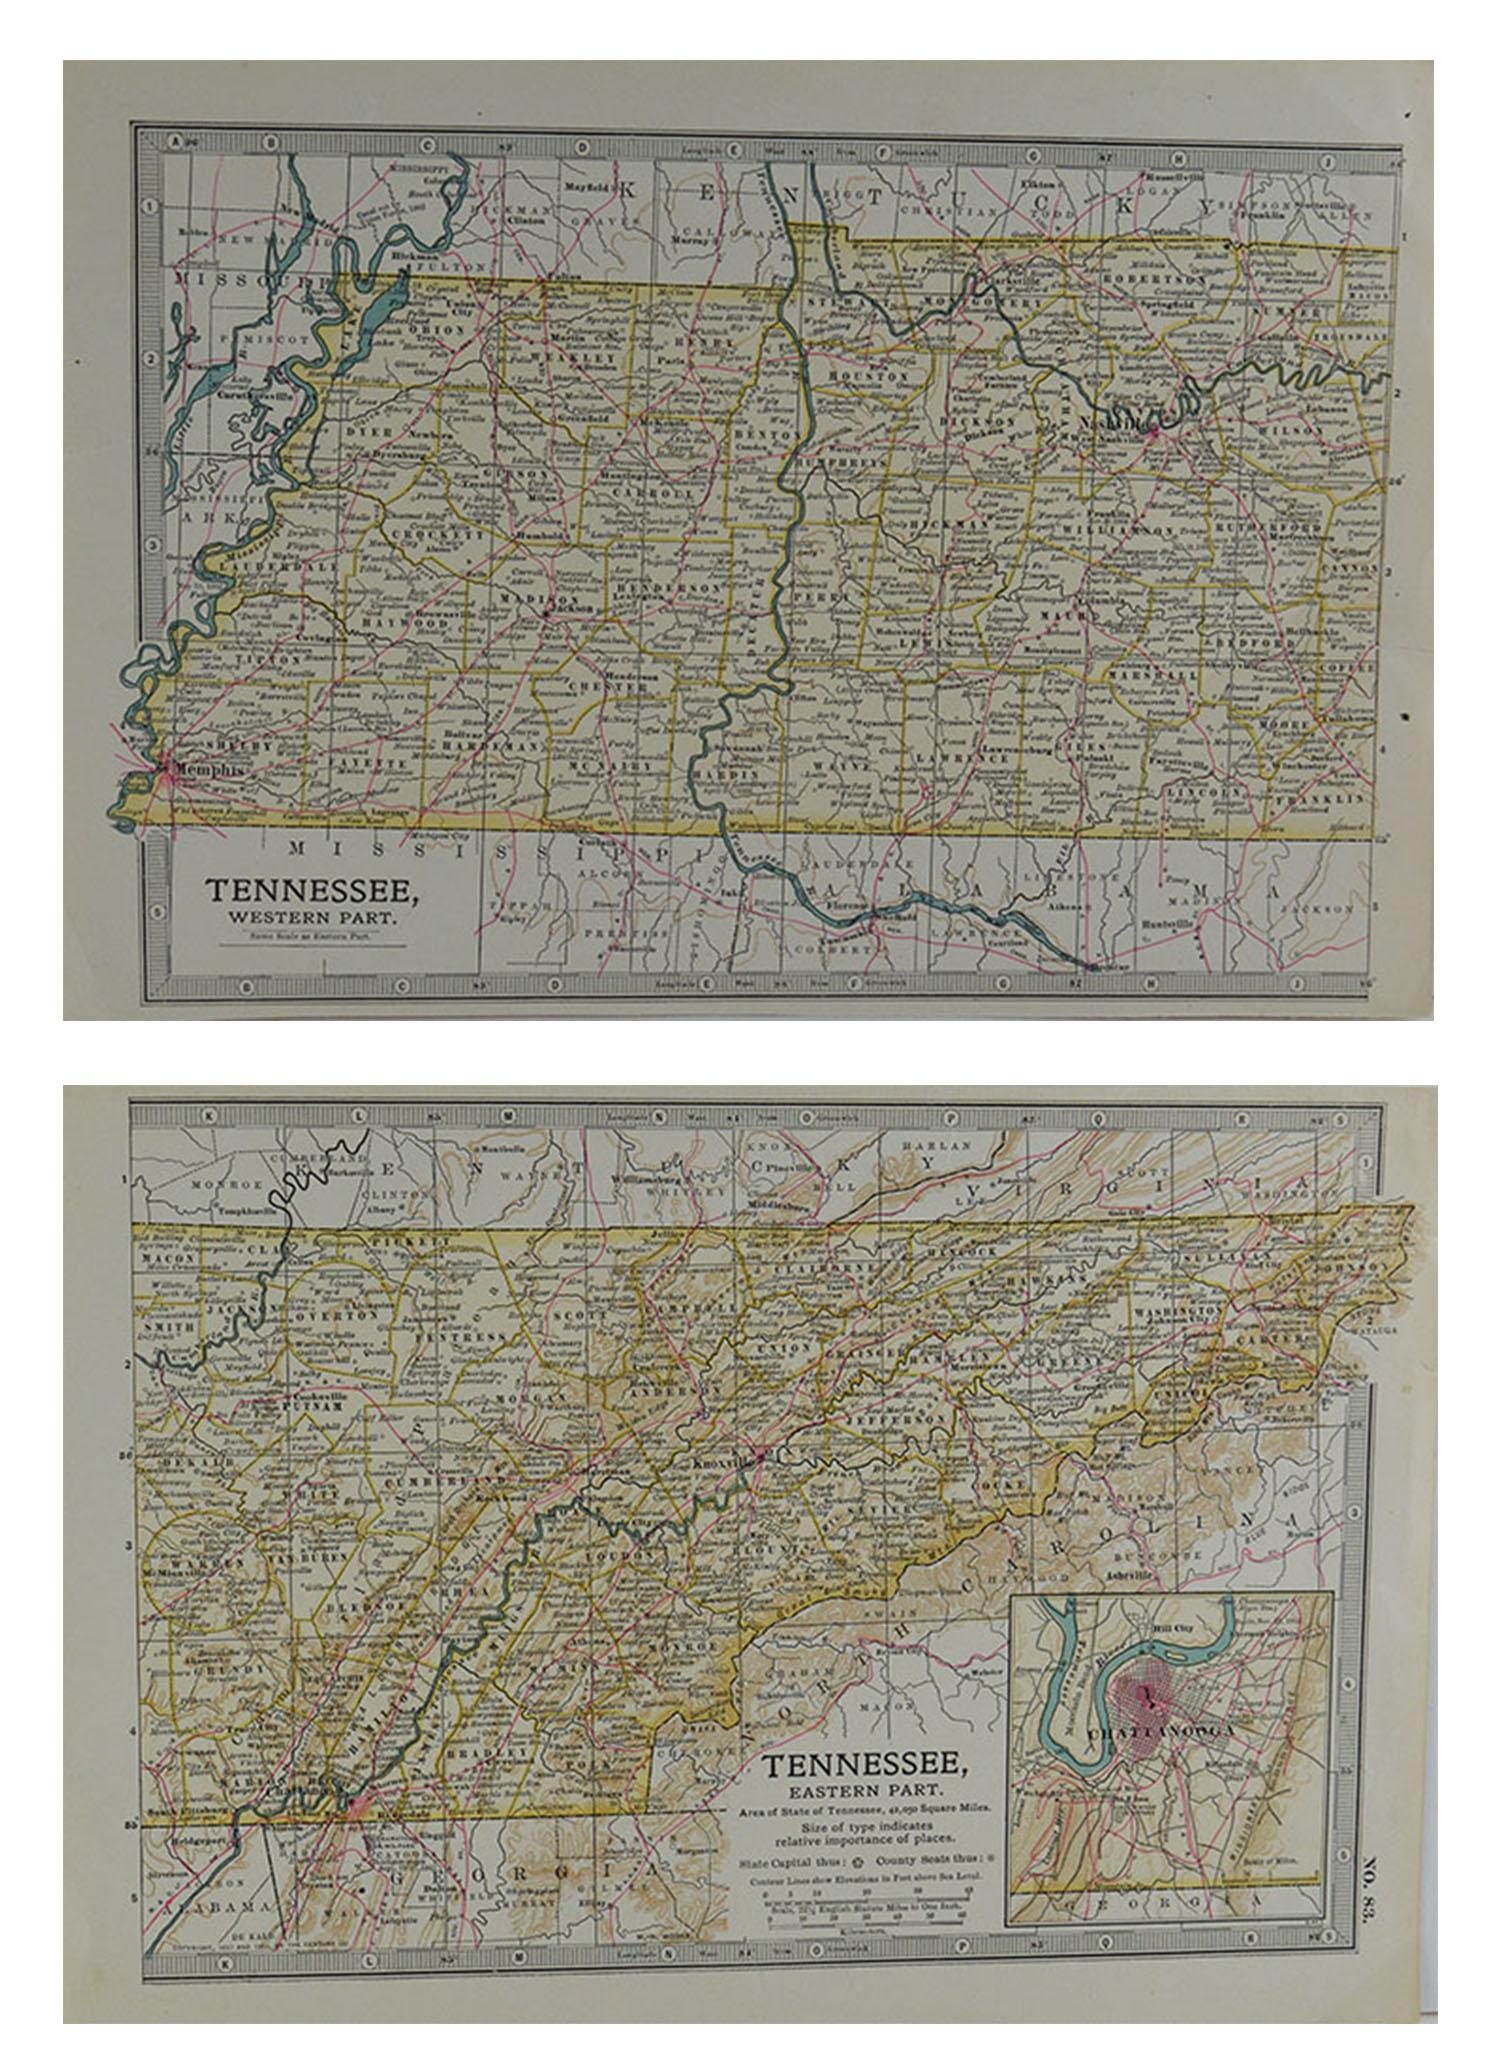 Great map of Tennessee (in 2 parts)

Original color.

Published circa 1890

Repair to an edge tear on one of them

Unframed

The measurement given below is for one sheet.    
  